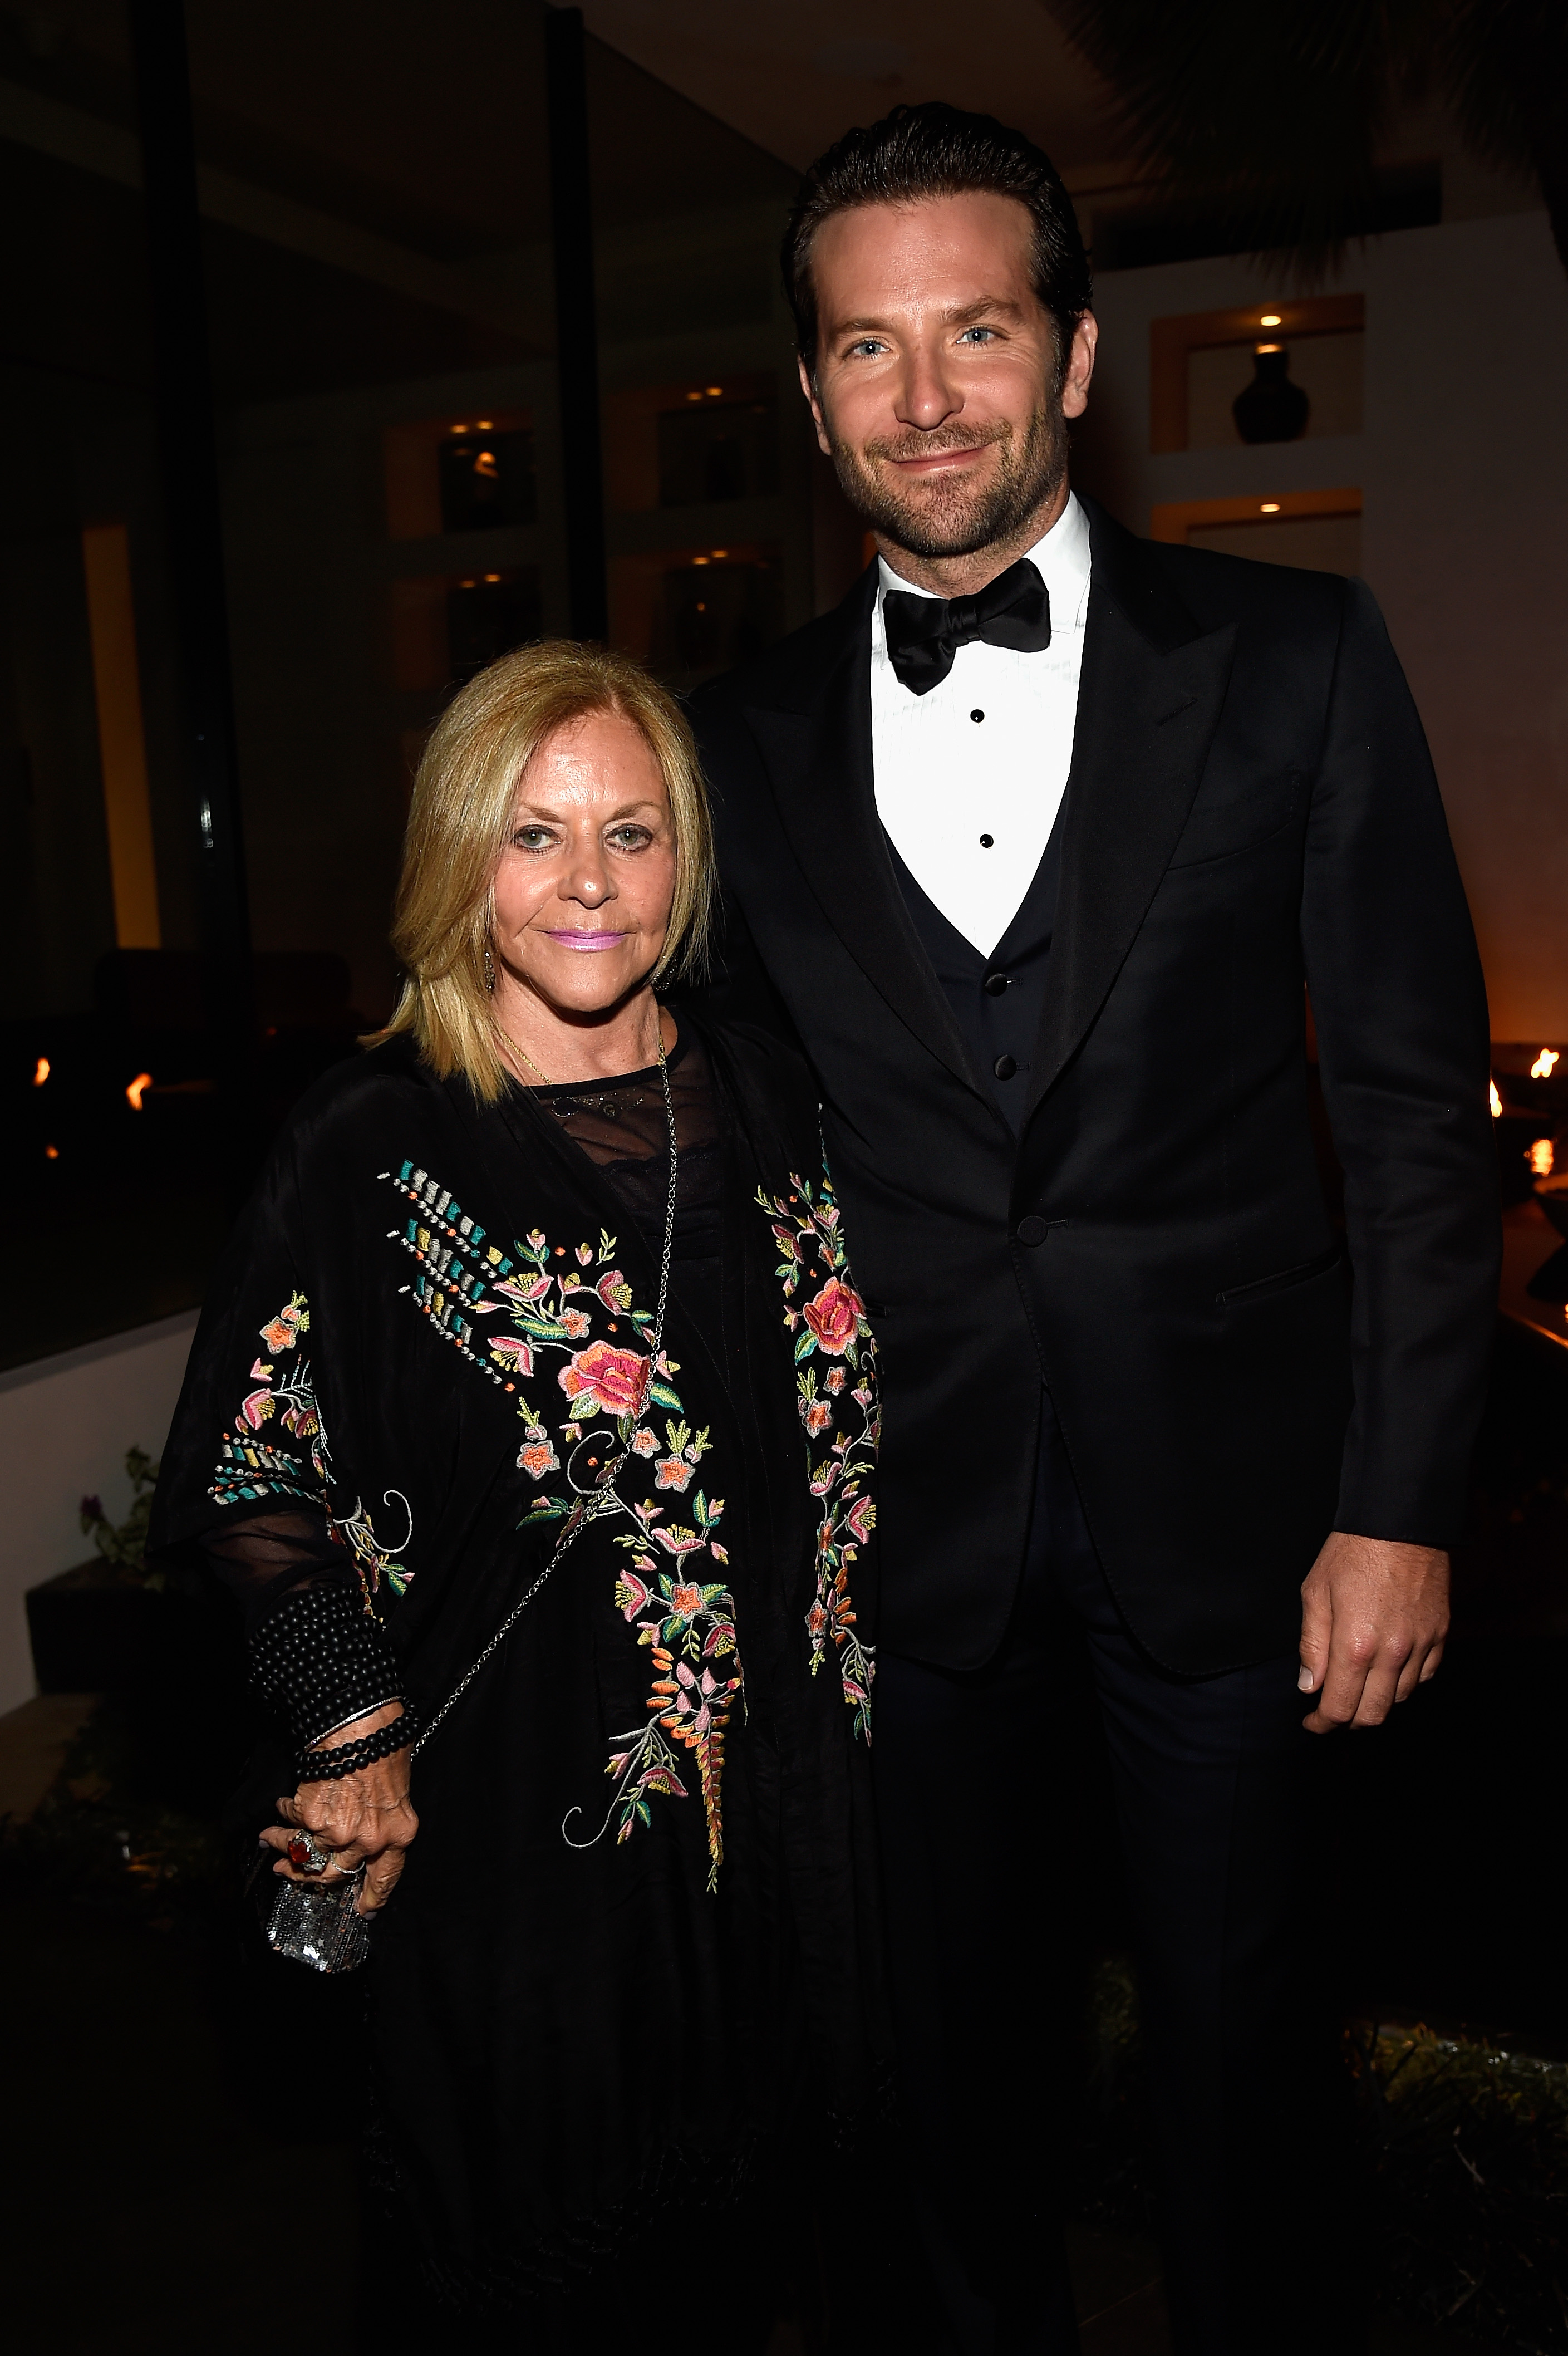 Gloria Campano et Bradley Cooper lors du gala Sean Parker And The Parker Foundation Launch The Parker Institute For Cancer Immunotherapy en 2016 | Source : Getty Images